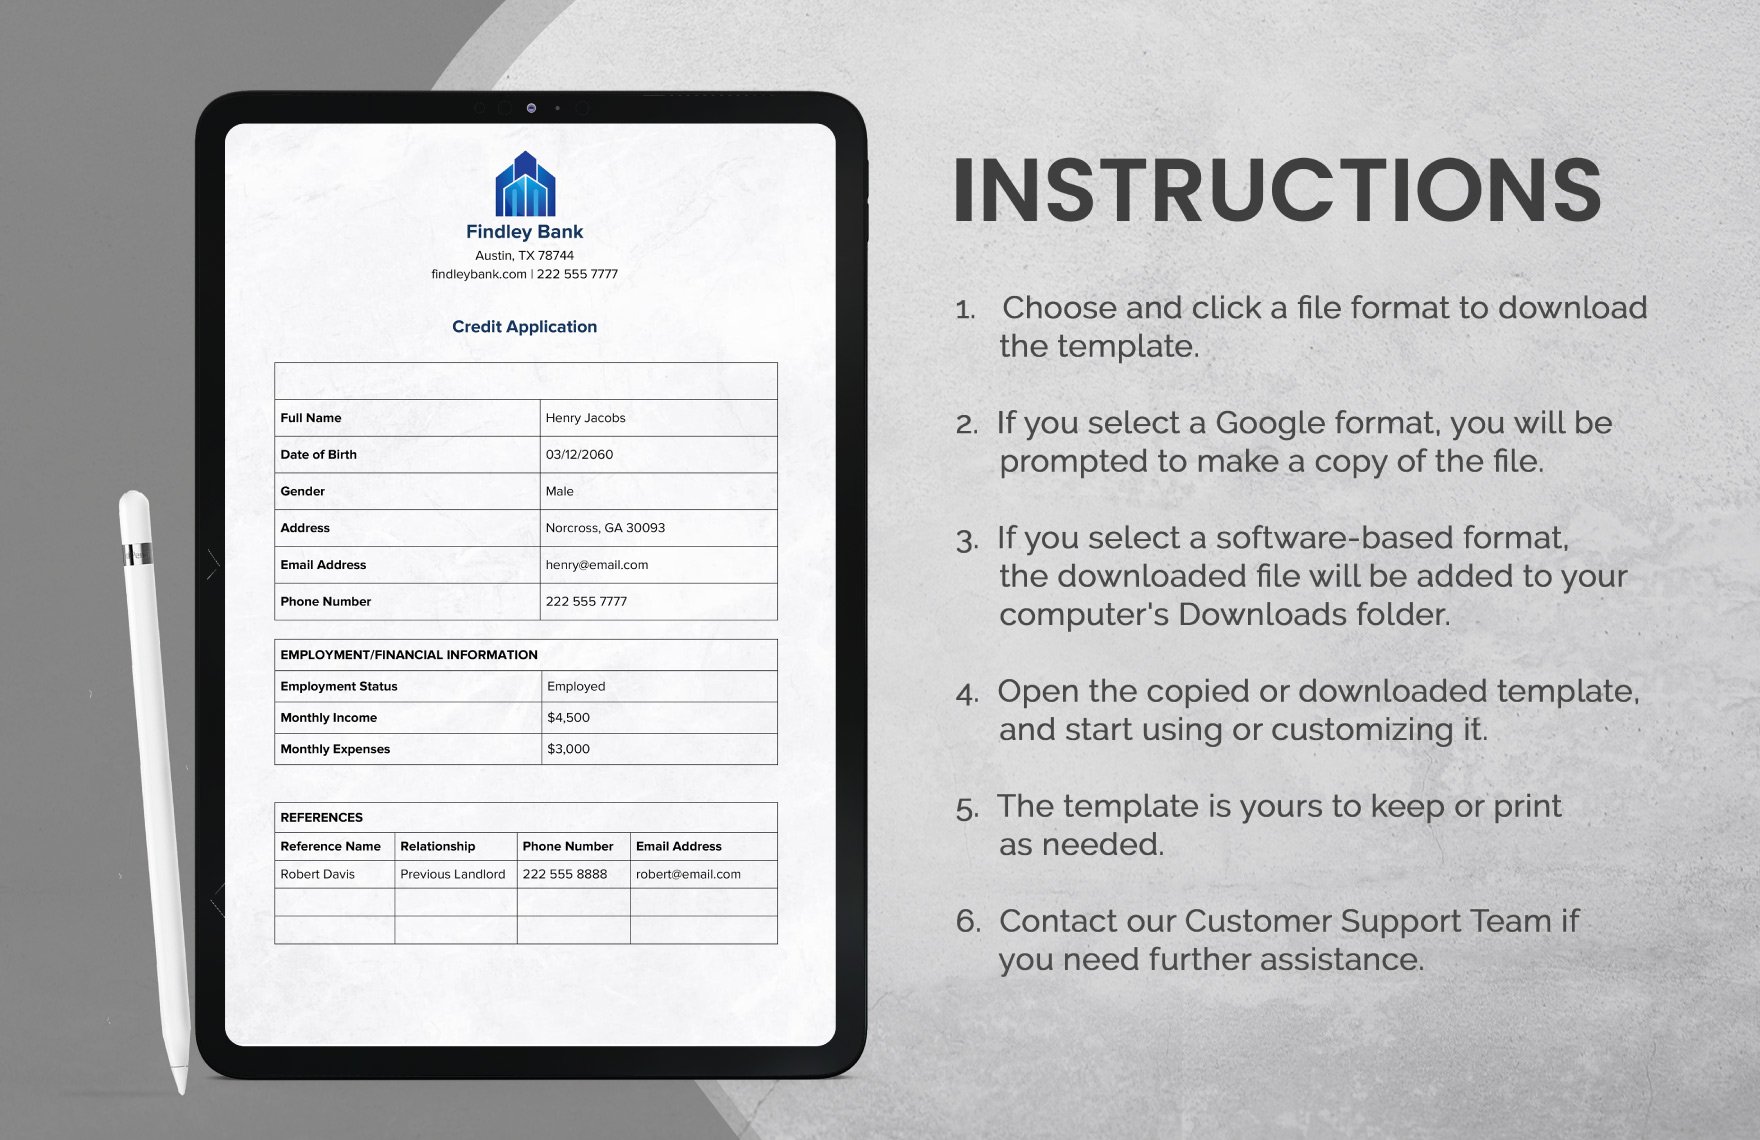 Credit Application Template